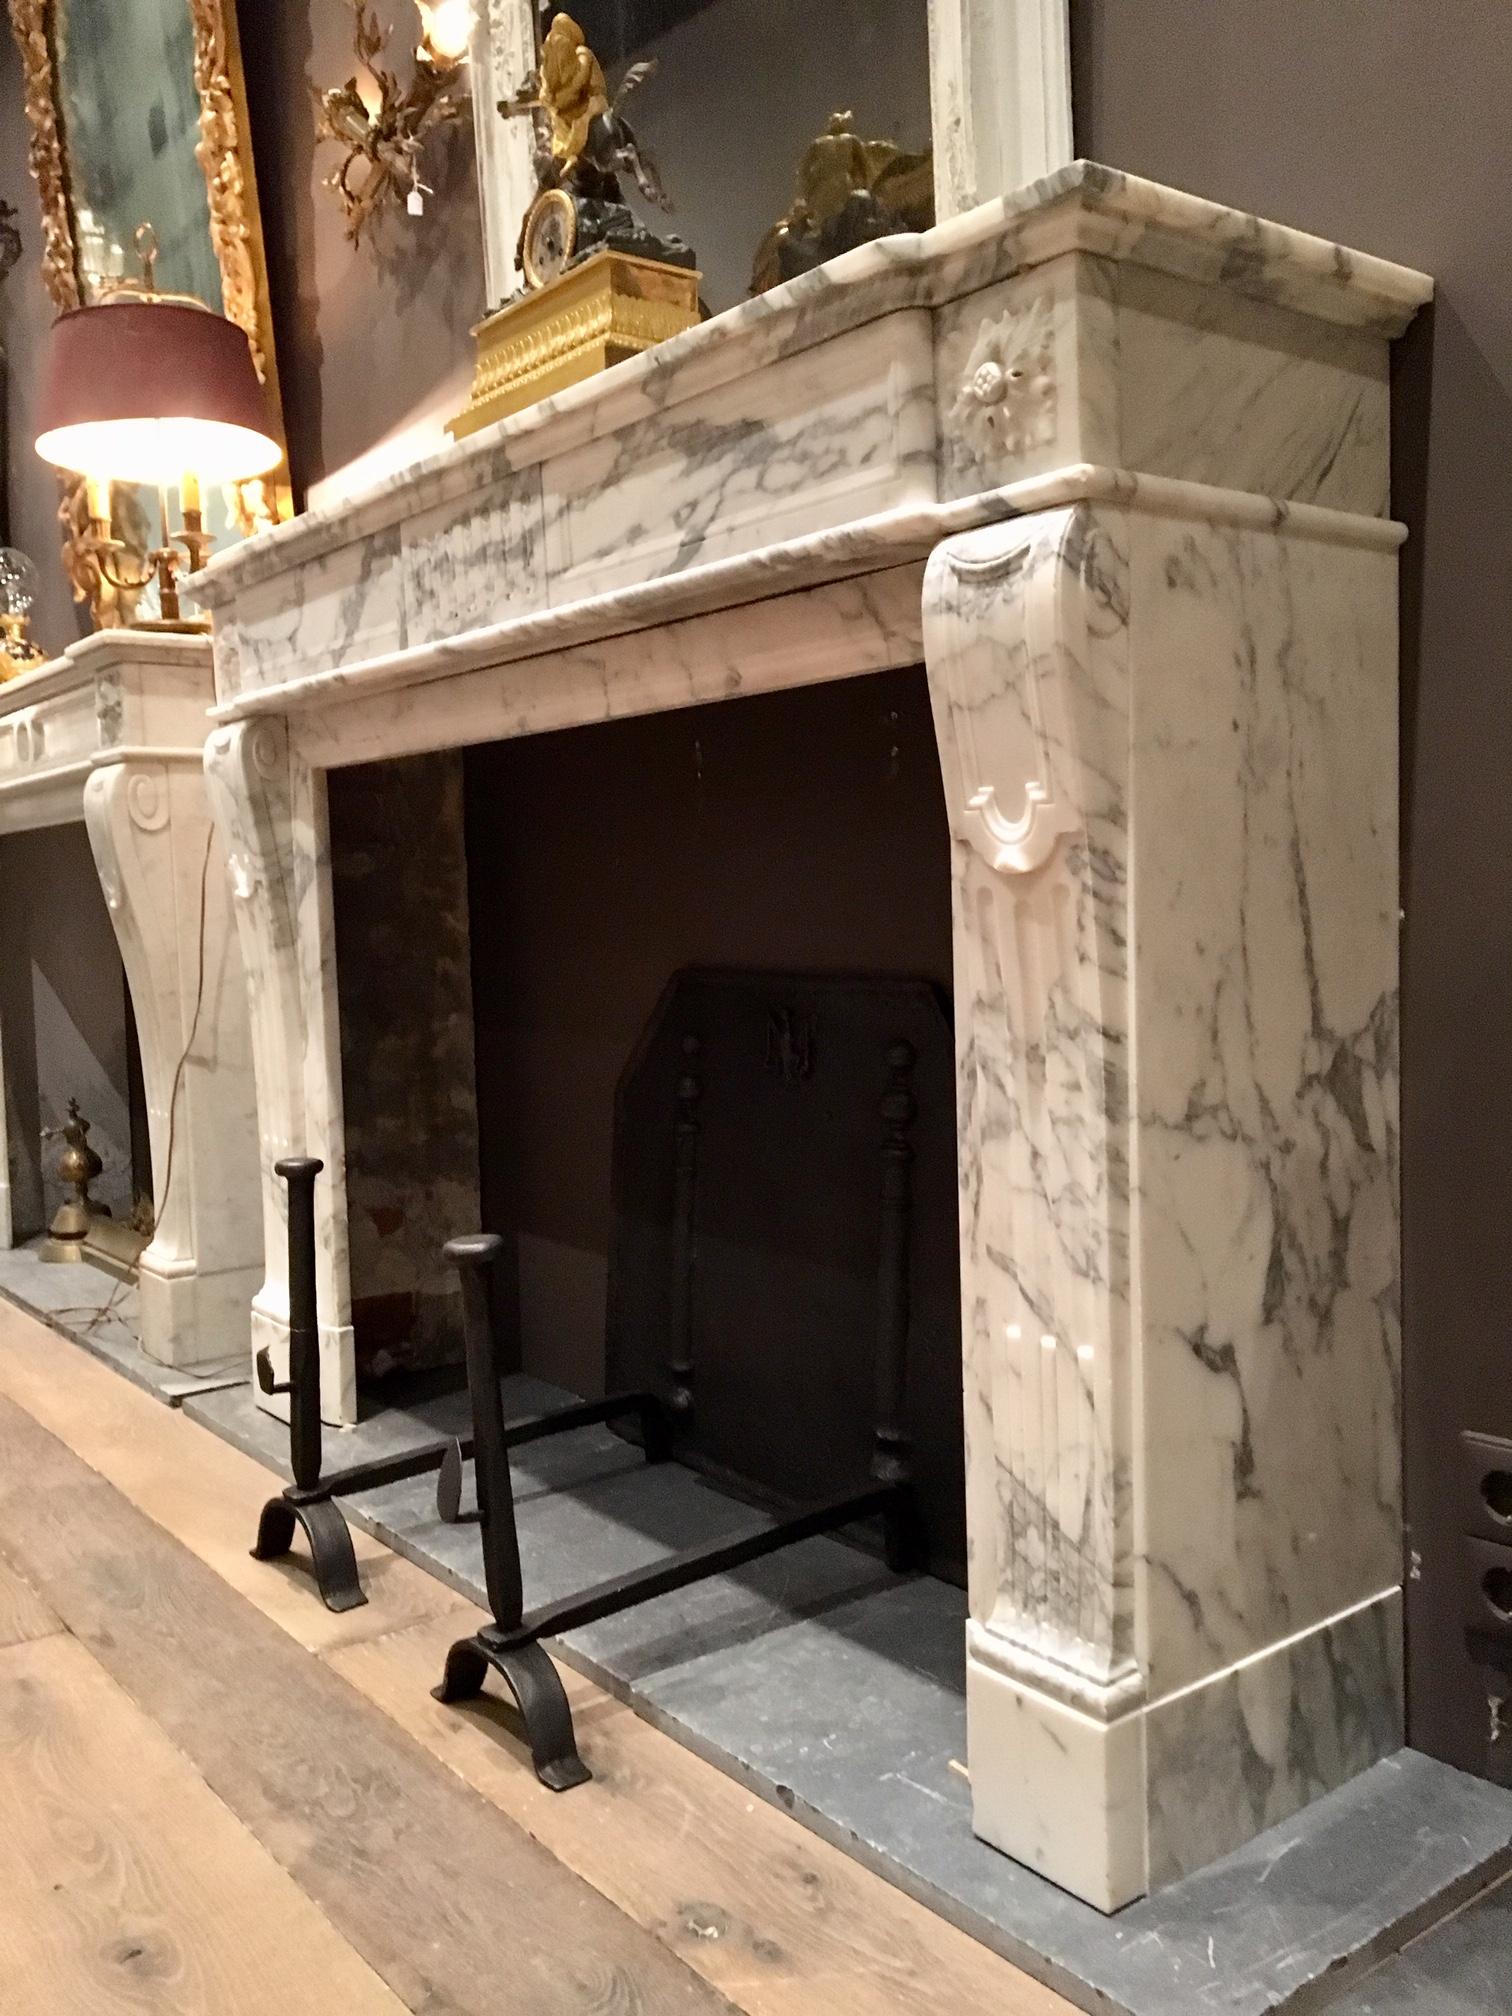 Antique Areabescato white and grey marble mantel (fireplace) piece (fireplace) with fluted jambs. It’s central, fluted front cassette flanked by panels and rosette corner ornaments.
Measures: W 155 cm x H 111 cm x D 39 cm
Opening W 115 cm x H 85